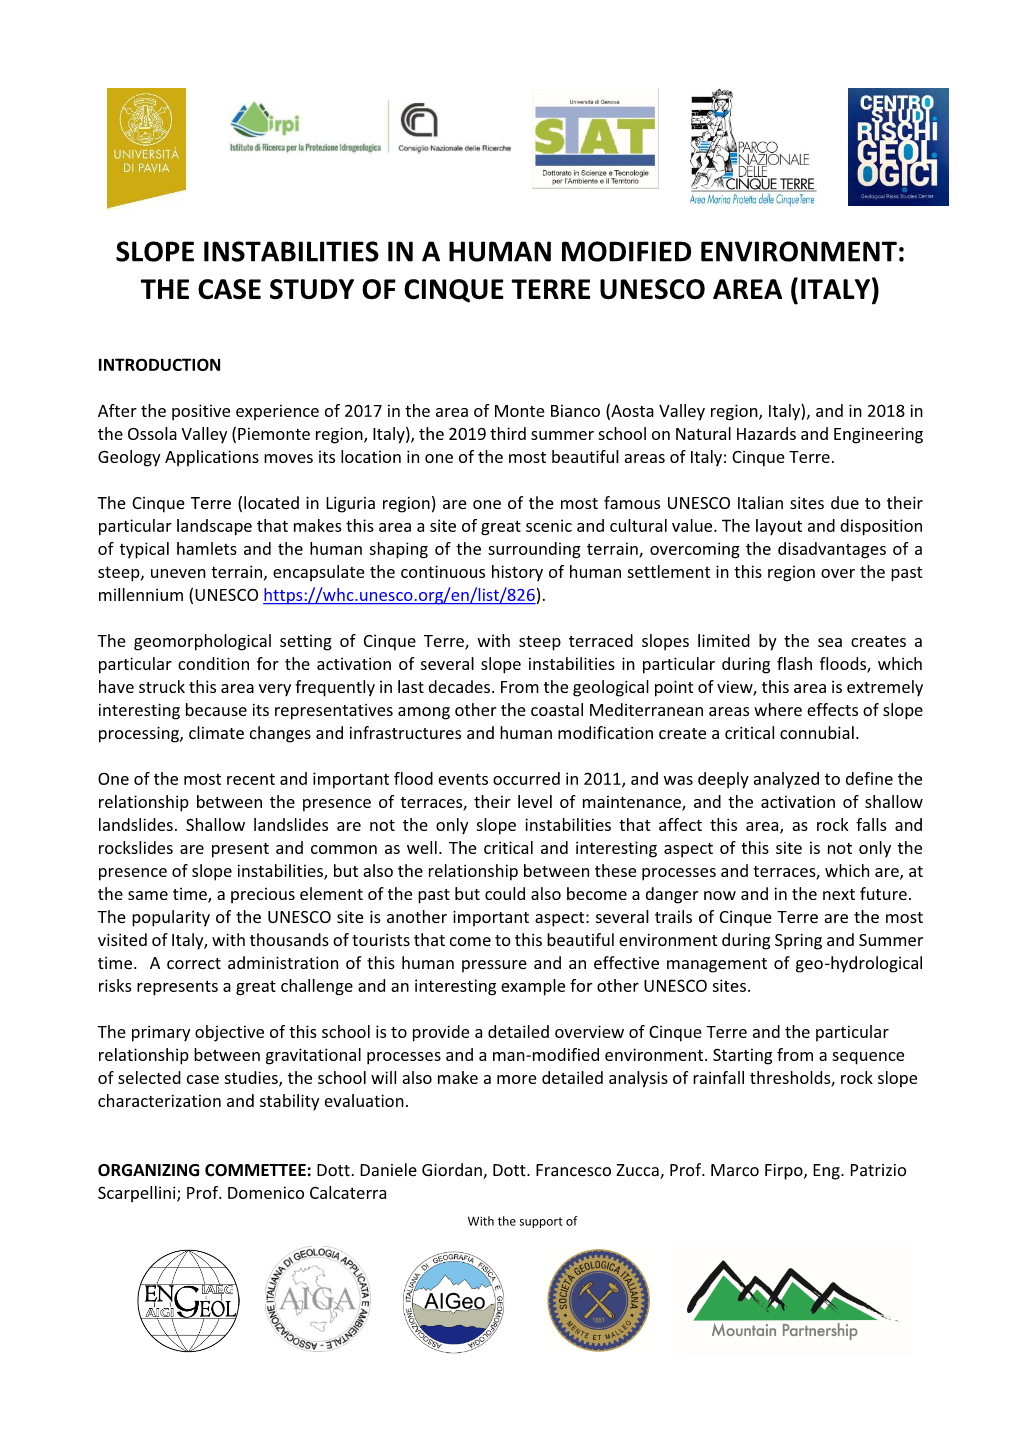 Slope Instabilities in a Human Modified Environment: the Case Study of Cinque Terre Unesco Area (Italy)